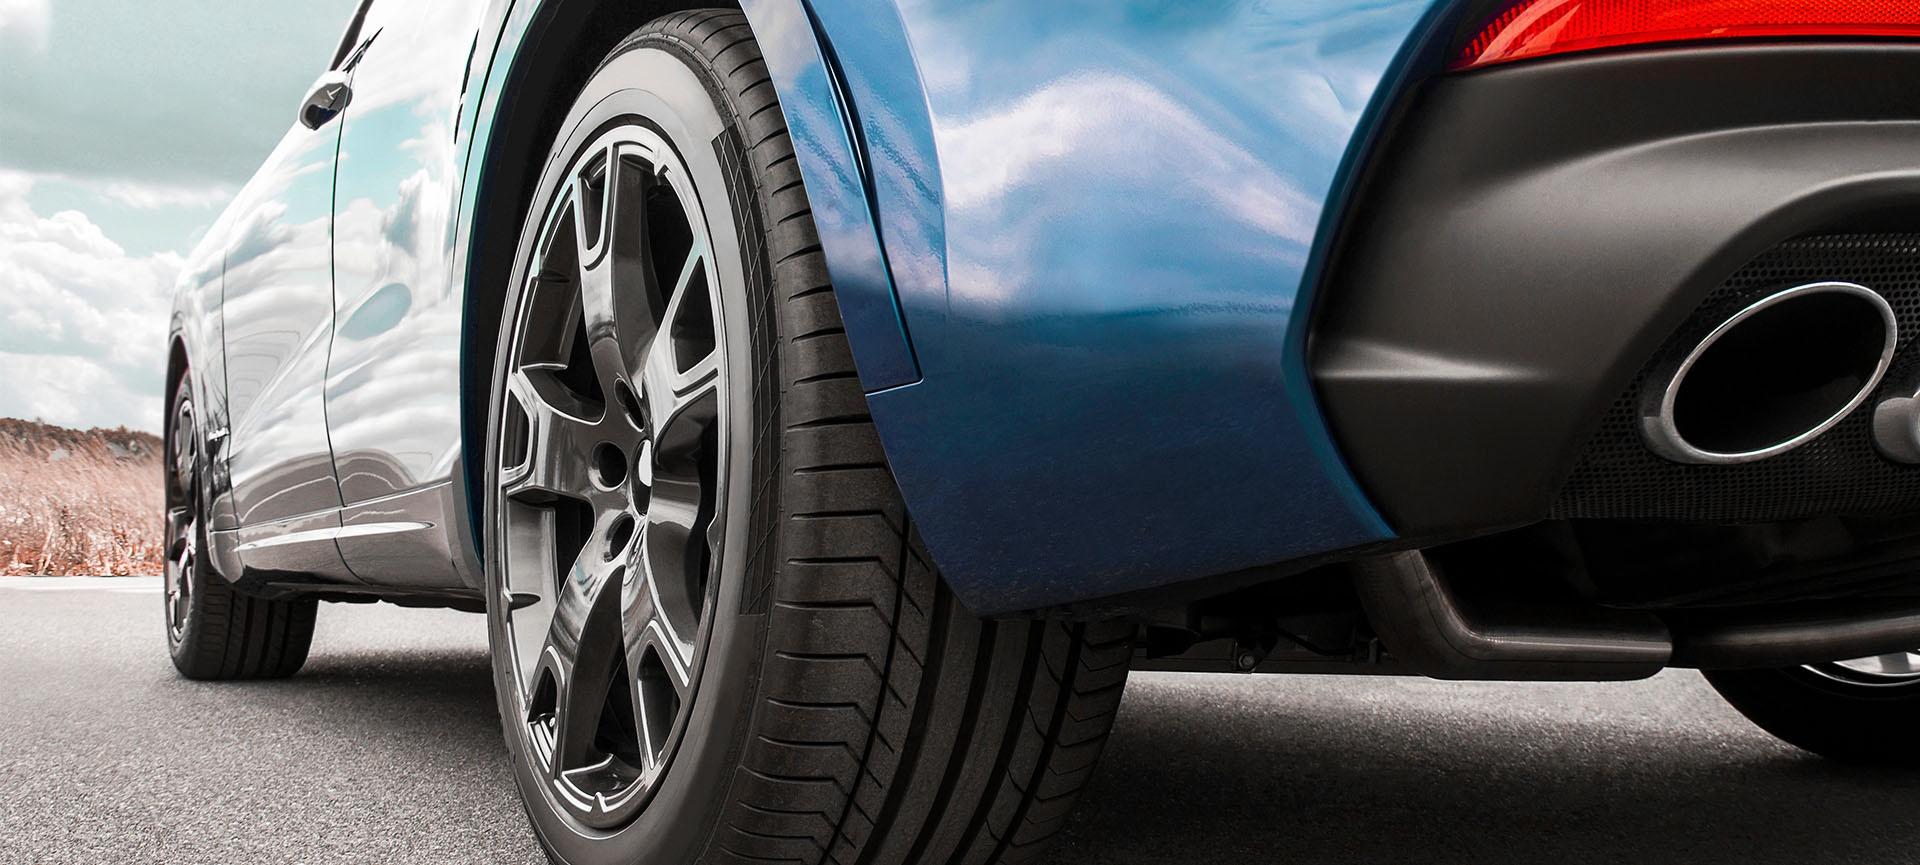 What are the Top 10 Ways to Maintain a Car’s Wheels?